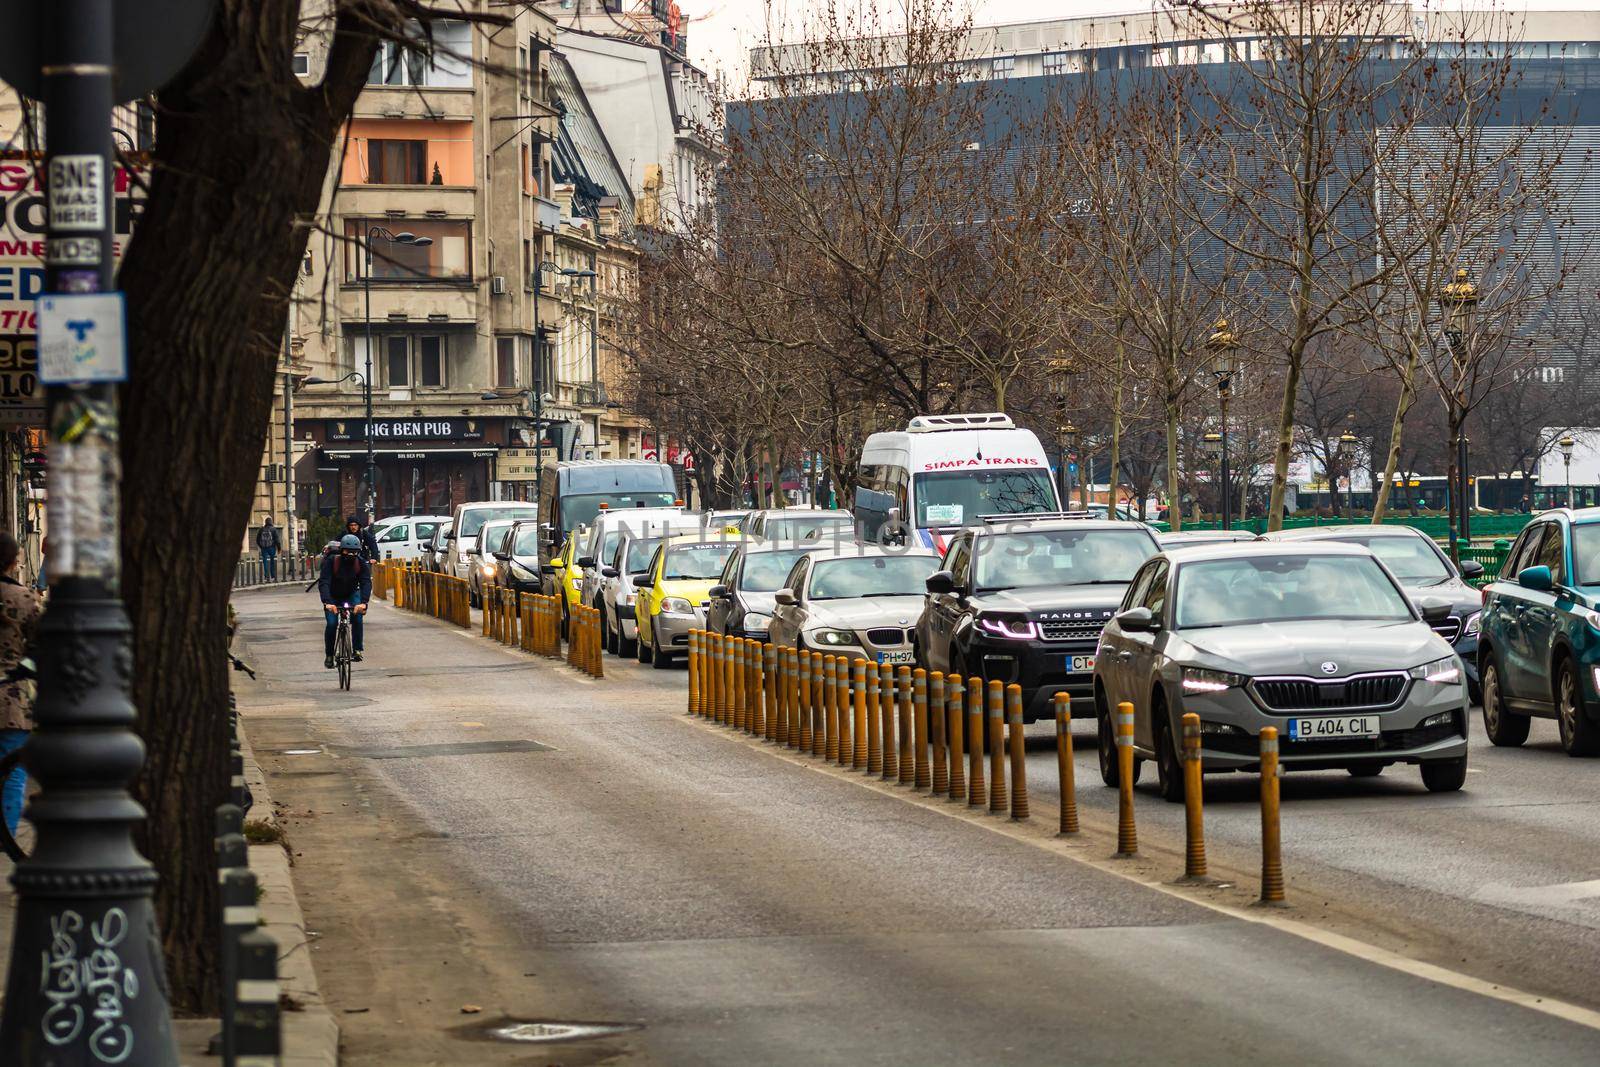 Car traffic at rush hour in downtown area of the city. Car pollution, traffic jam in the morning and evening in the capital city of Bucharest, Romania, 2020 by vladispas